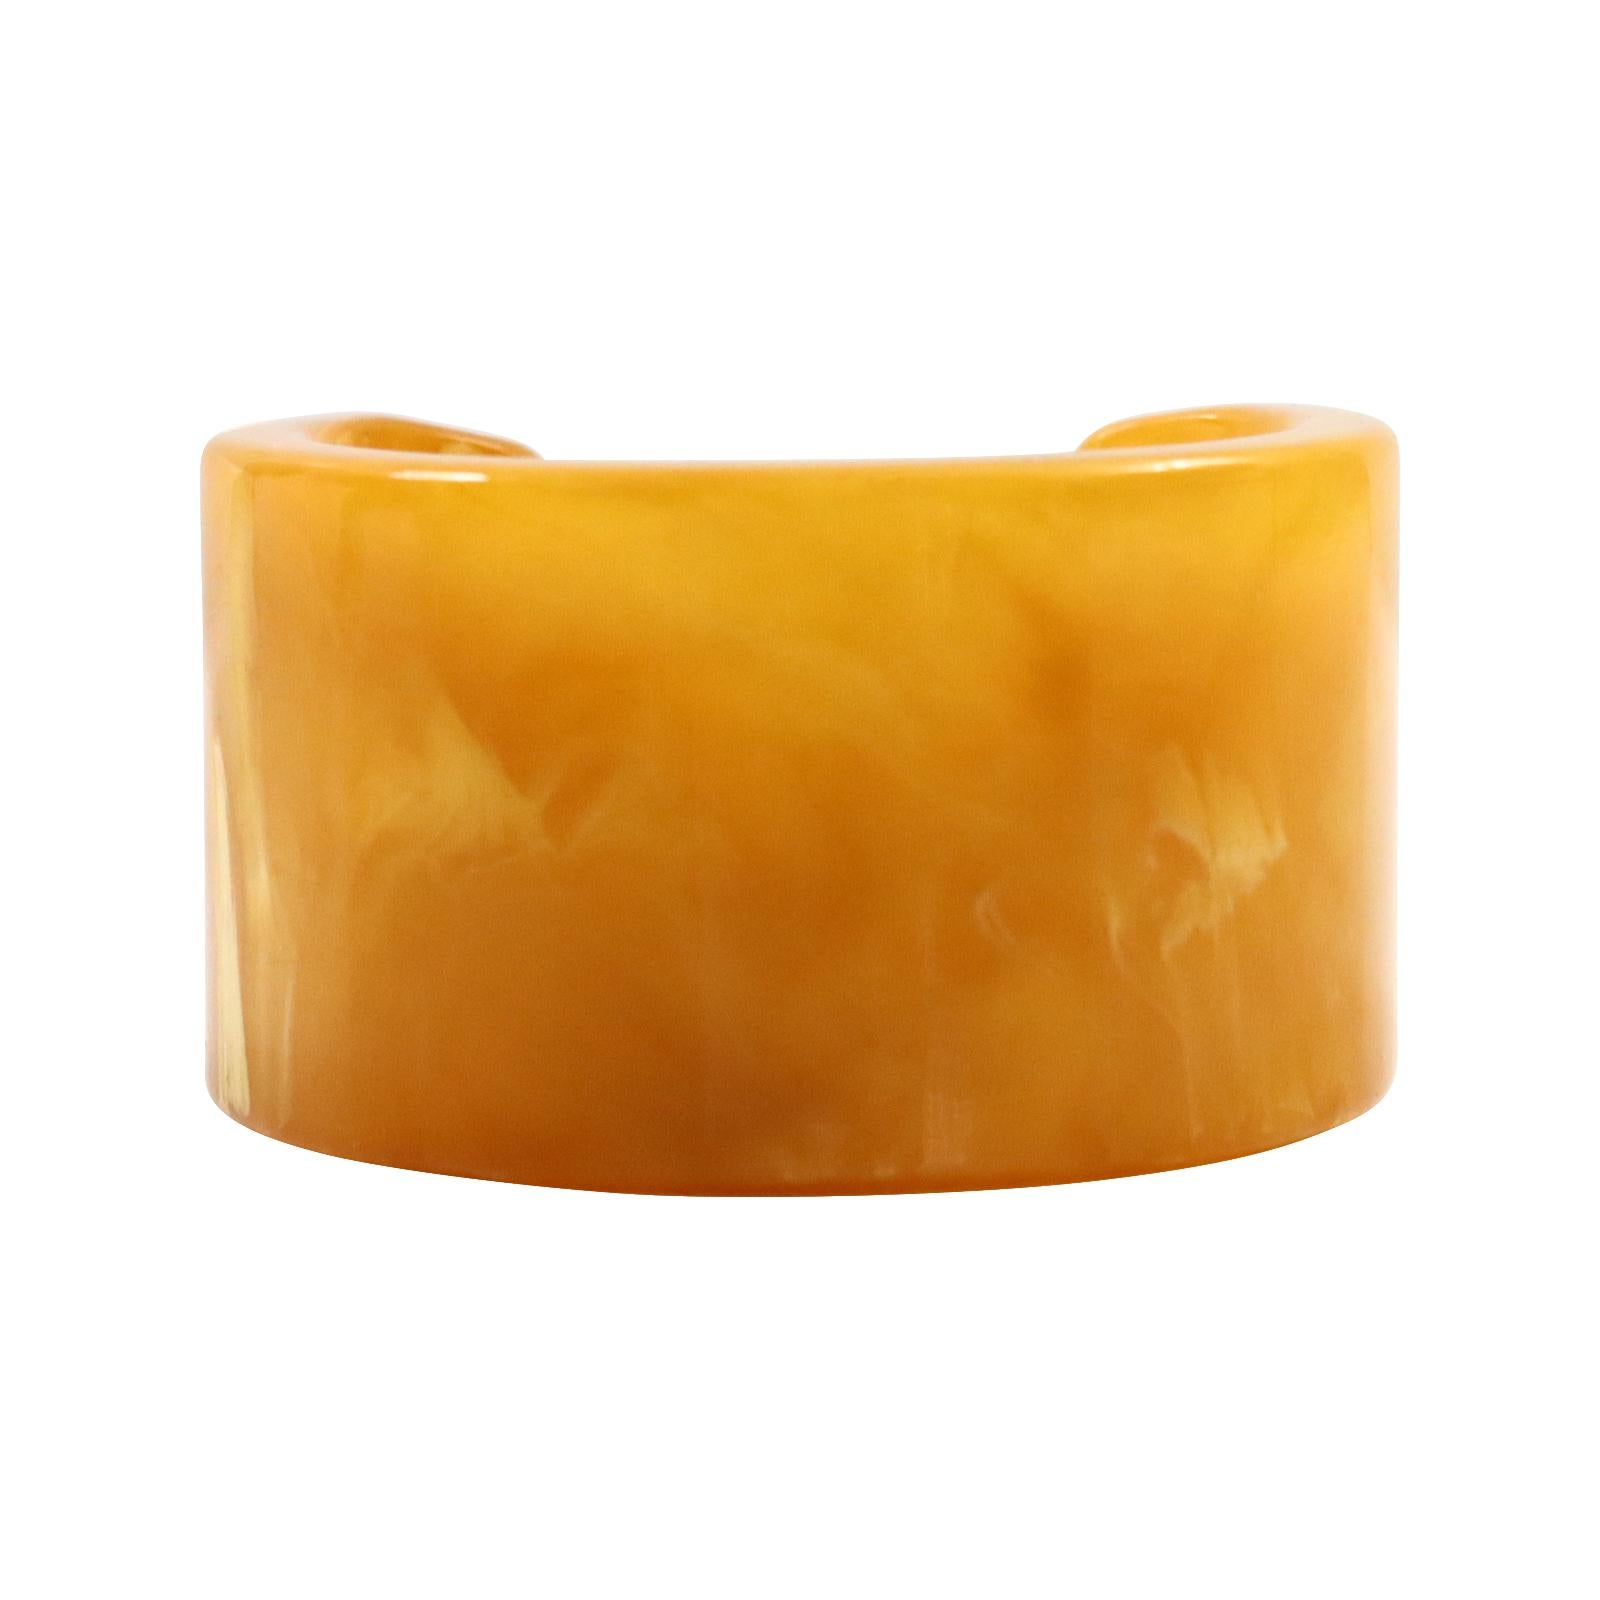 Vintage Bakelite Camel Marbleized Cuff Circa 1940s.  This is so stunning.  Fits on the smaller to medium size.  The camel color has various lighter marbleized shades running through it.  This is in perfect condition and smooth all the way around. 